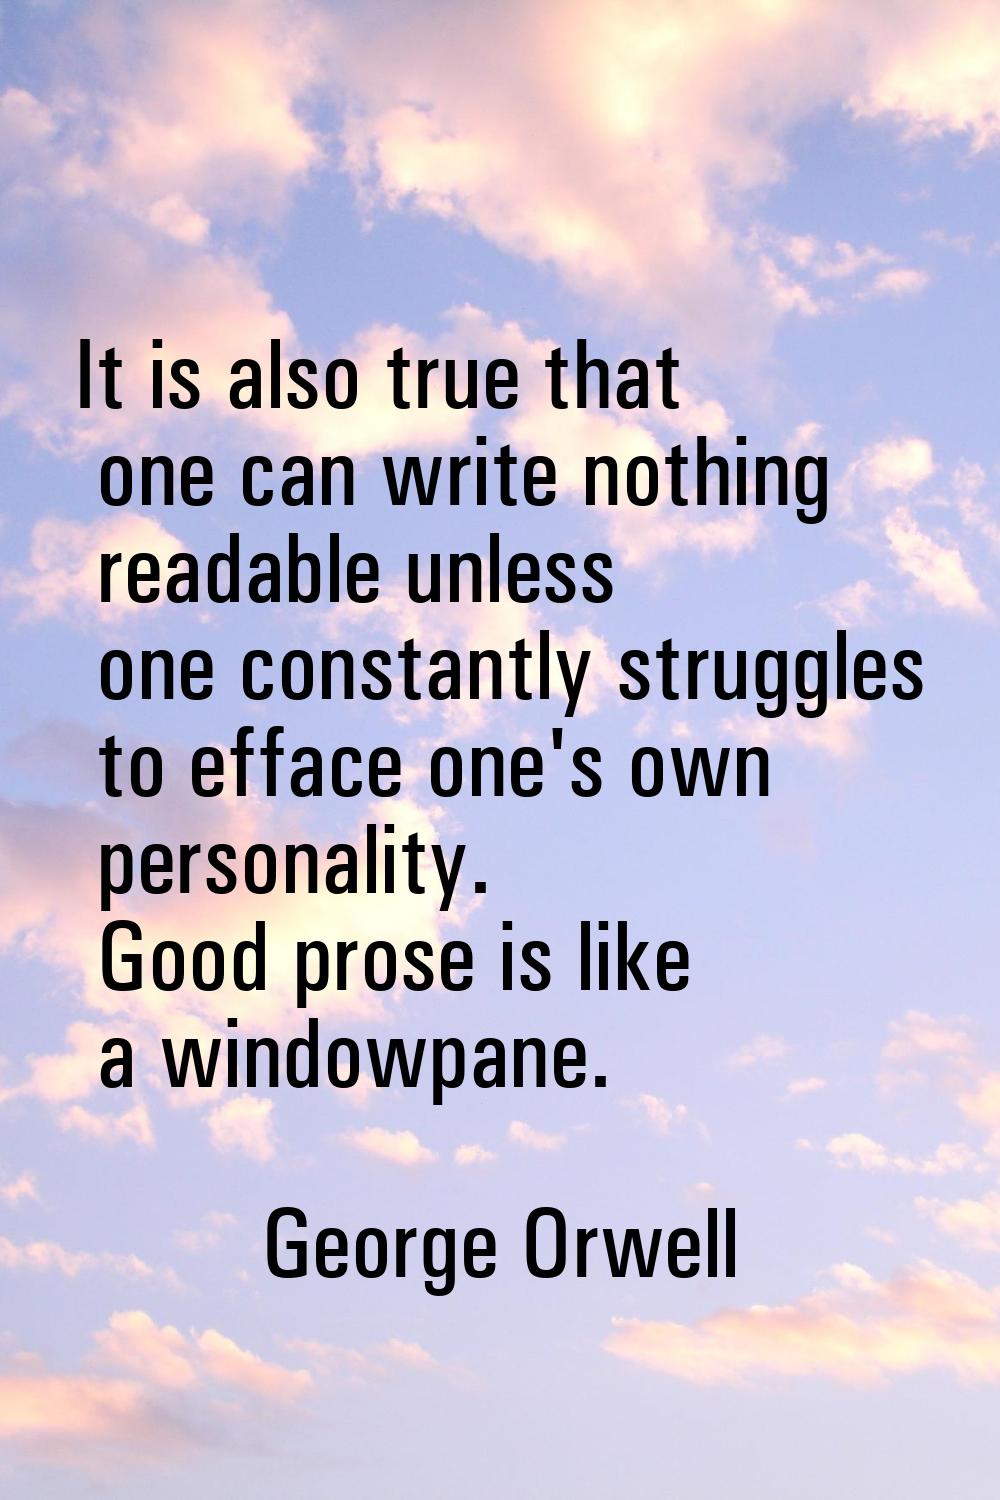 It is also true that one can write nothing readable unless one constantly struggles to efface one's